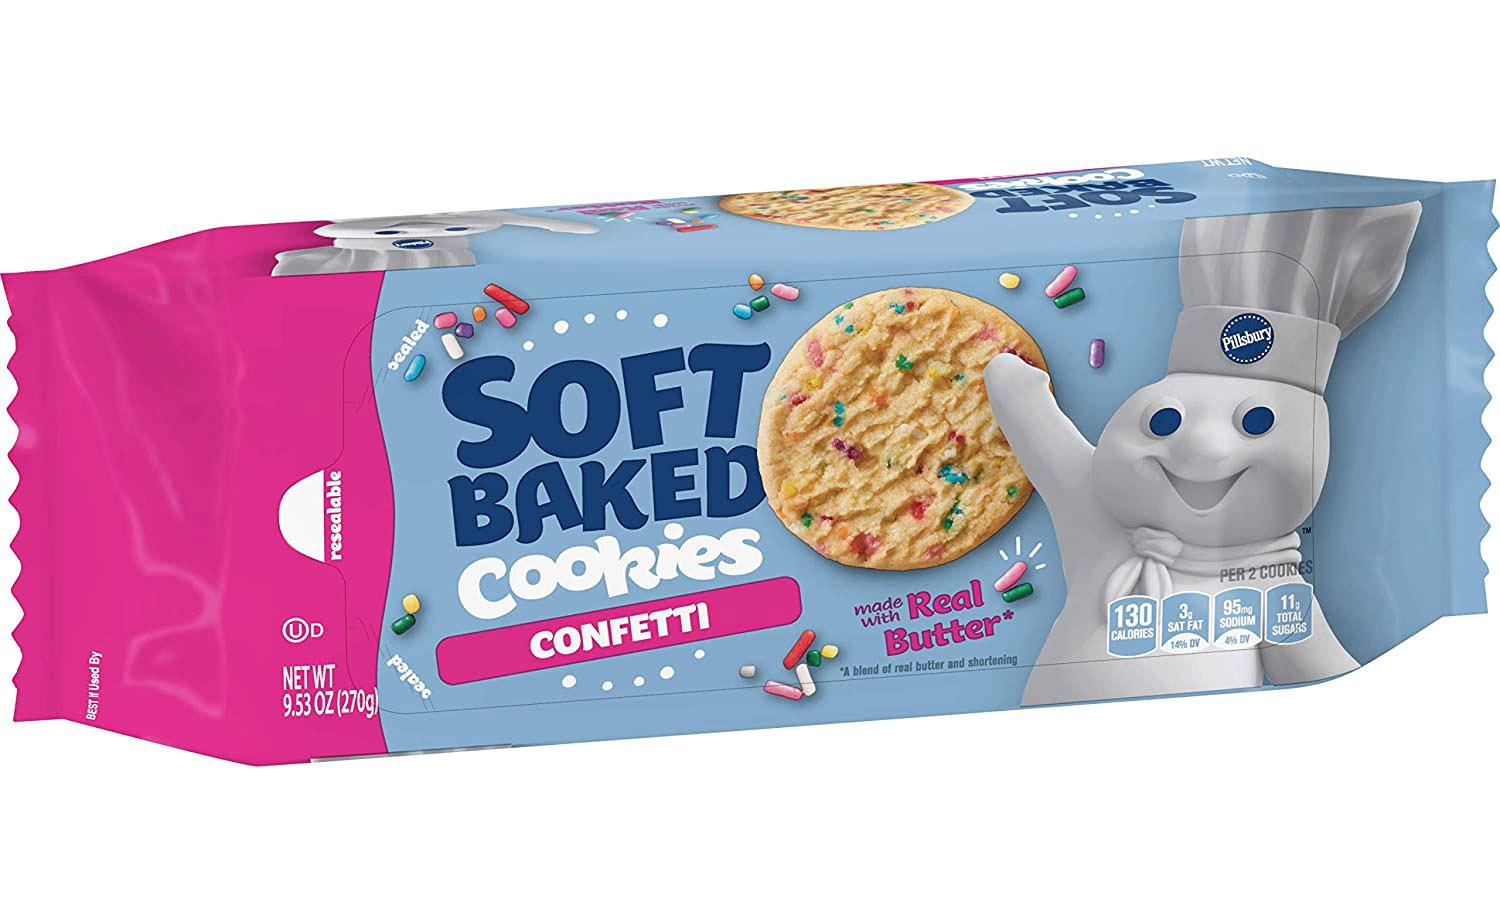 Pillsbury Soft Baked Confetti Cookies for $1.09